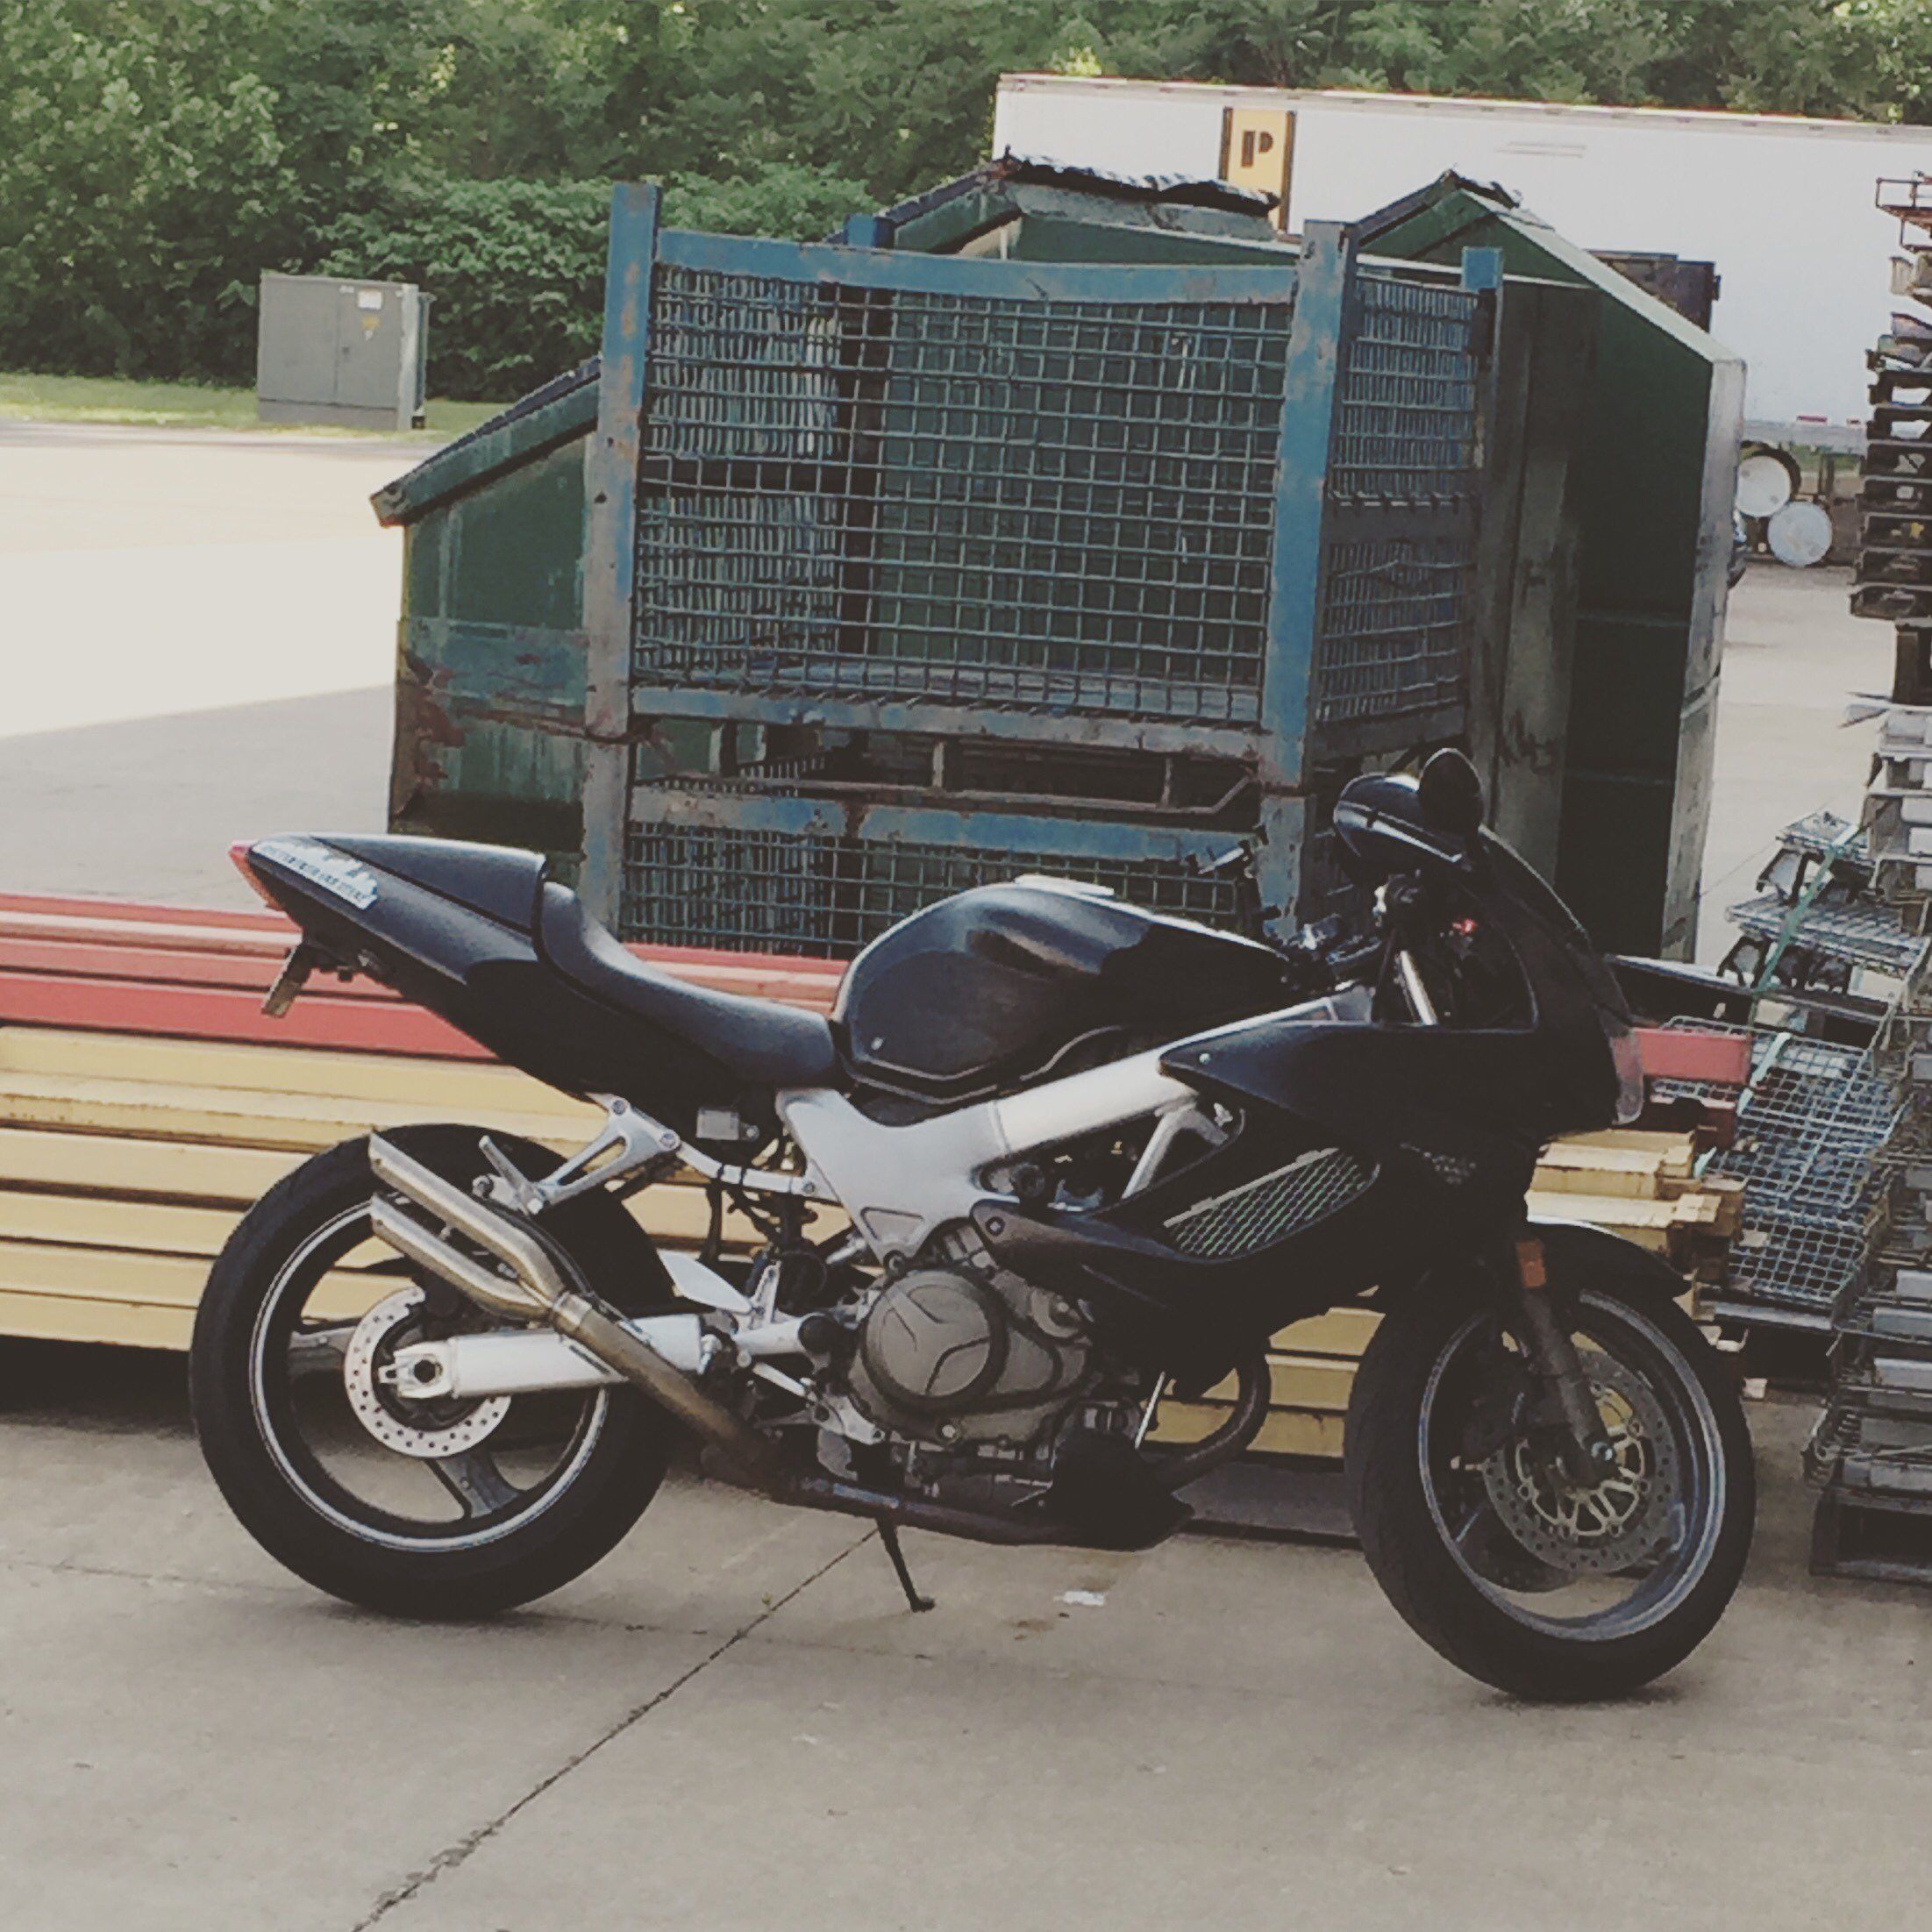 The VTR1000F